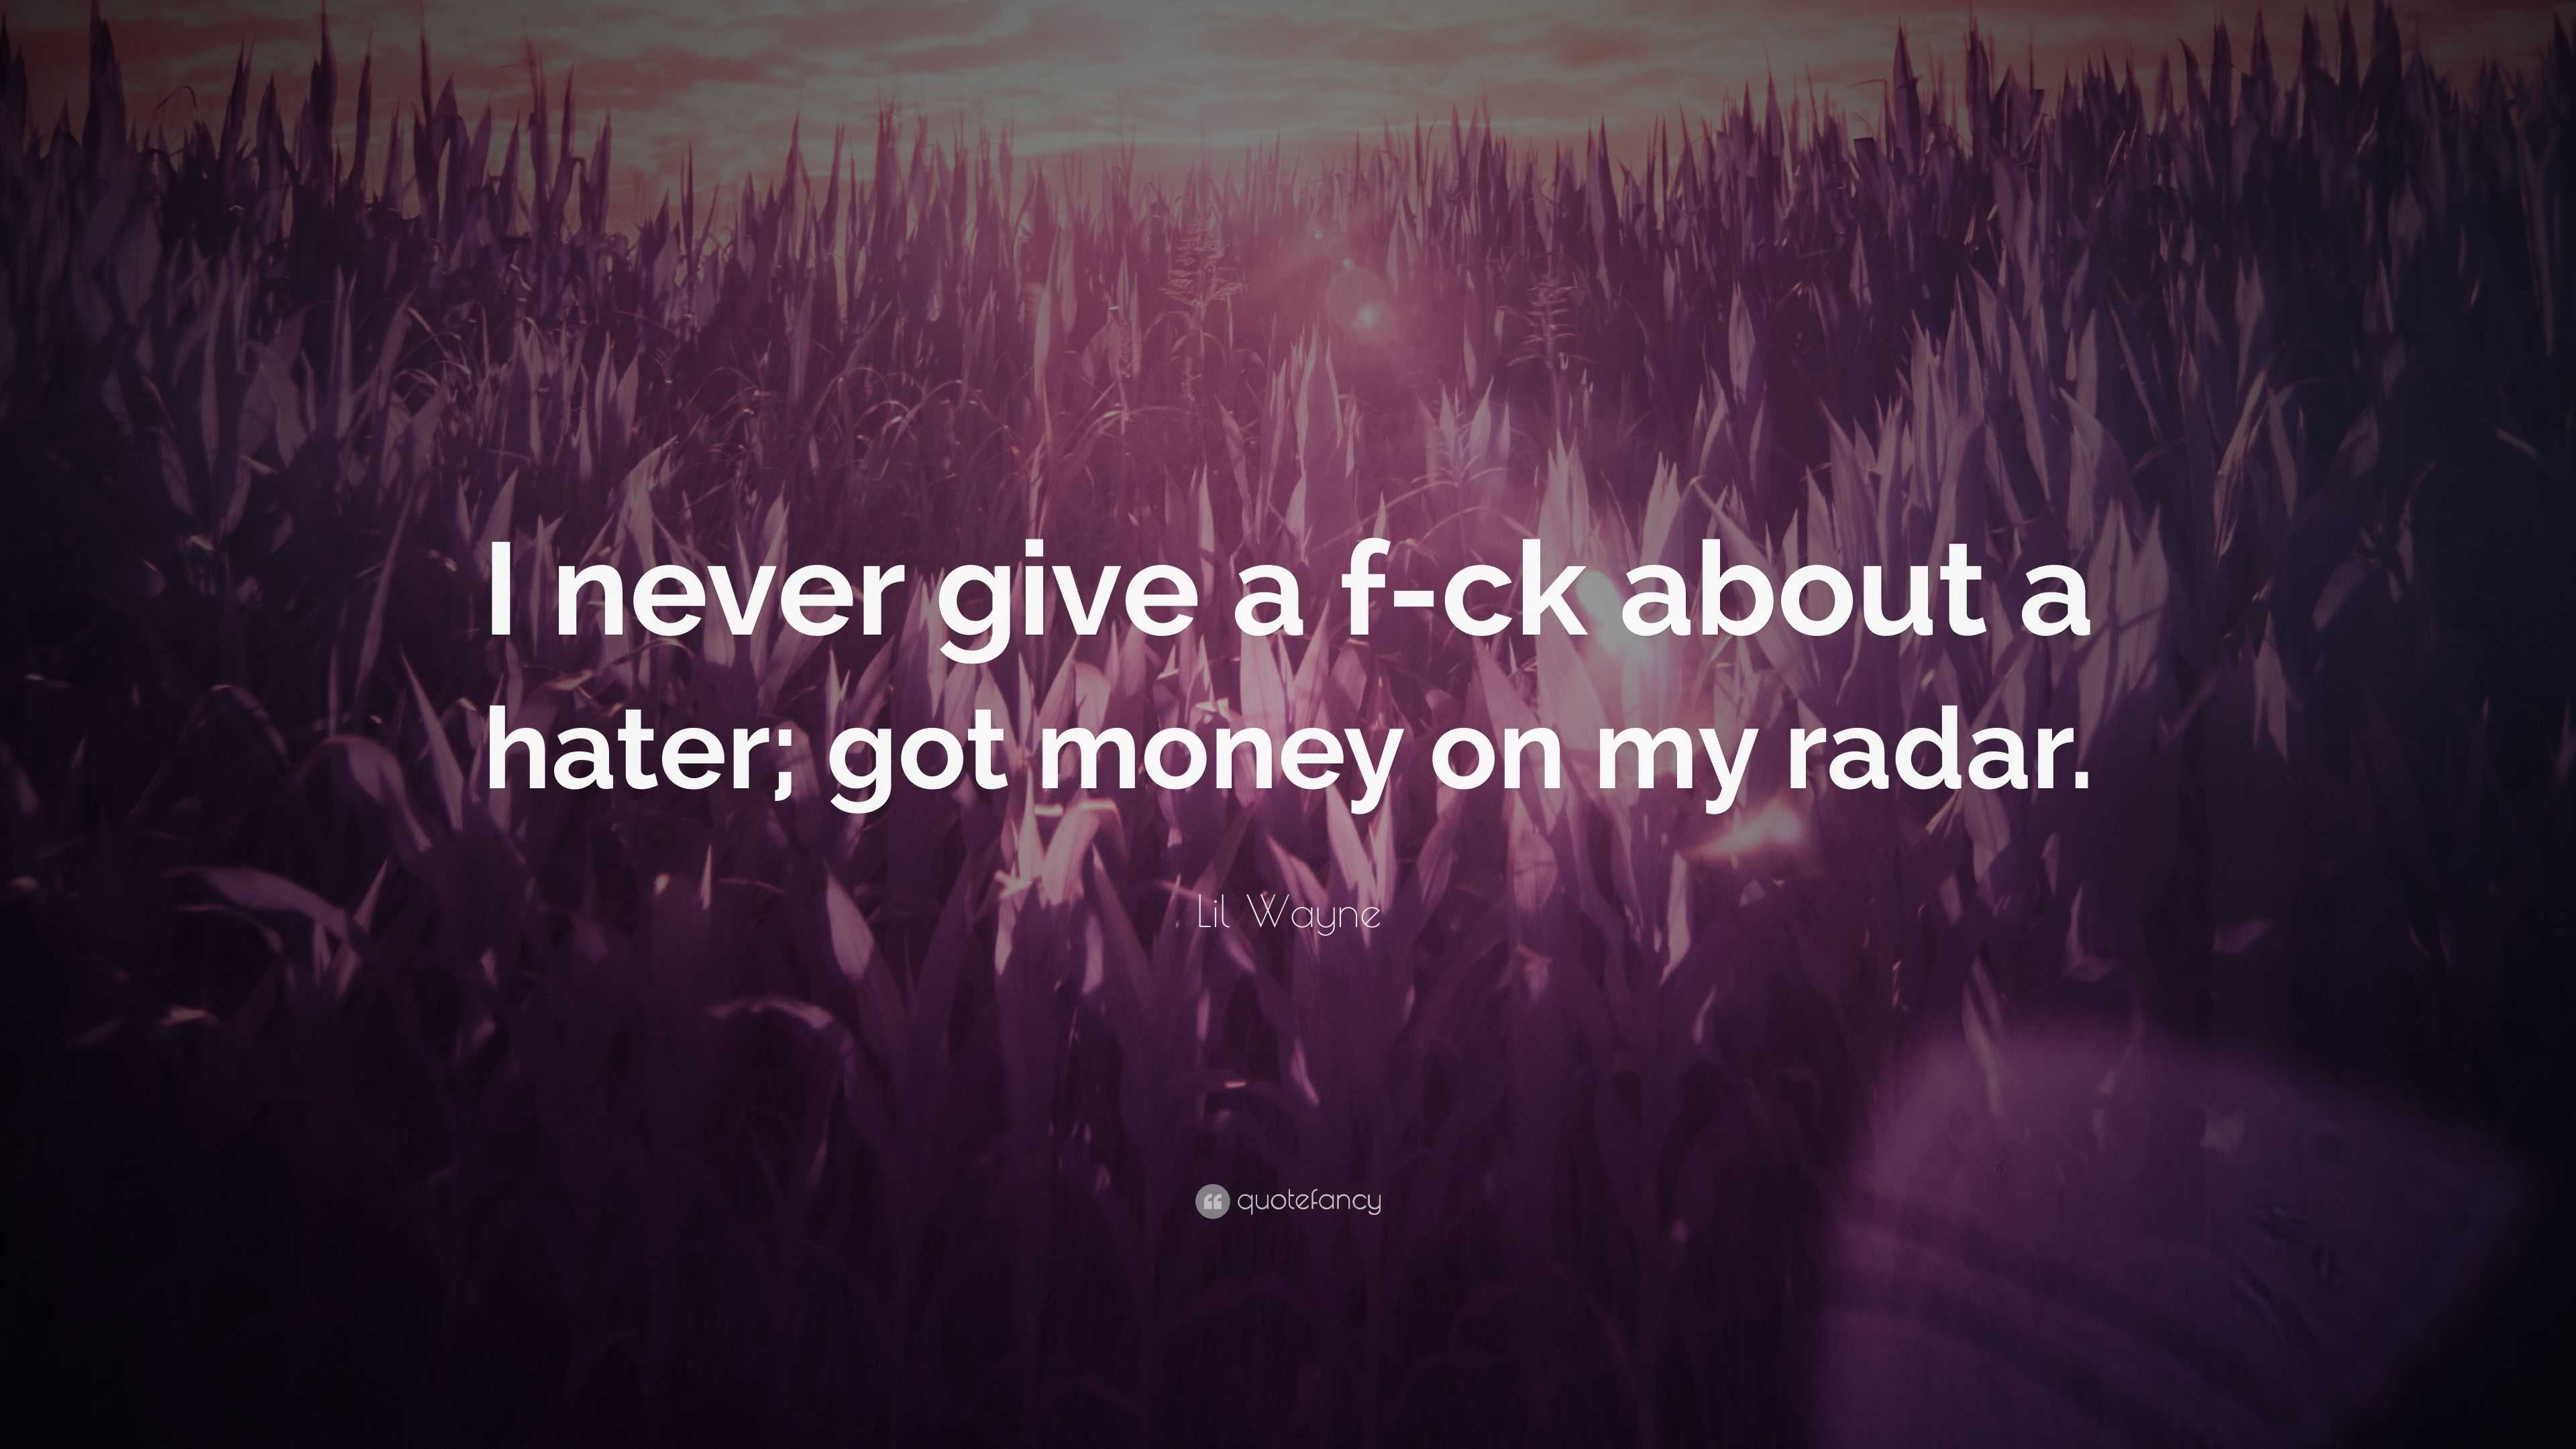 Lil Wayne Quote I Never Give A F Ck About A Hater Got Money On My Radar 7 Wallpapers Quotefancy